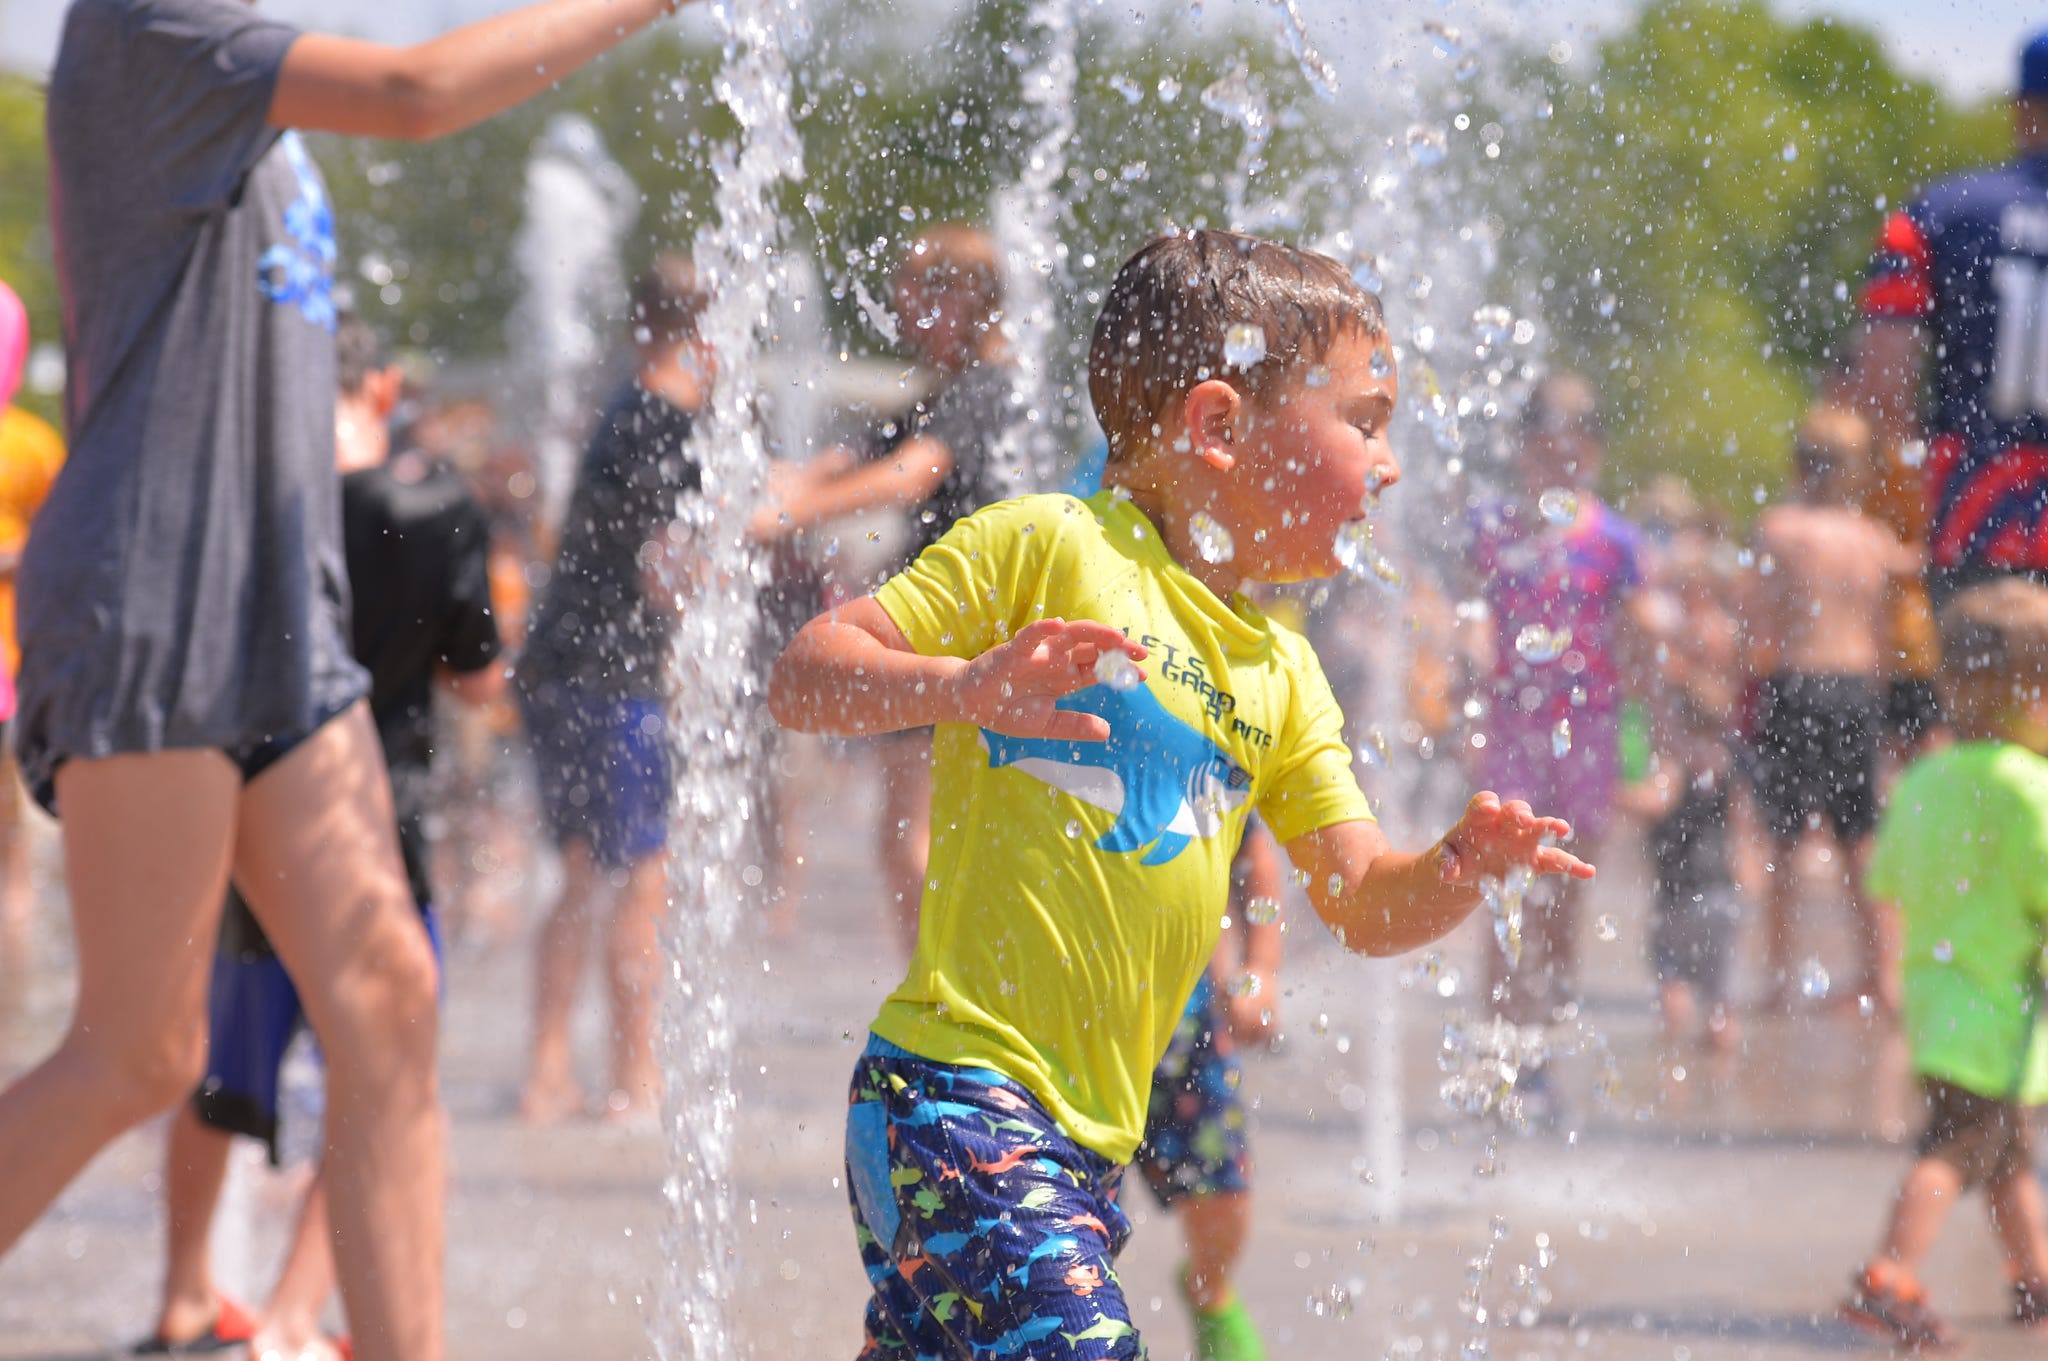 Rivers, lakes, waterparks in Greenville, Spartanburg, Anderson, summer swimming safety tips